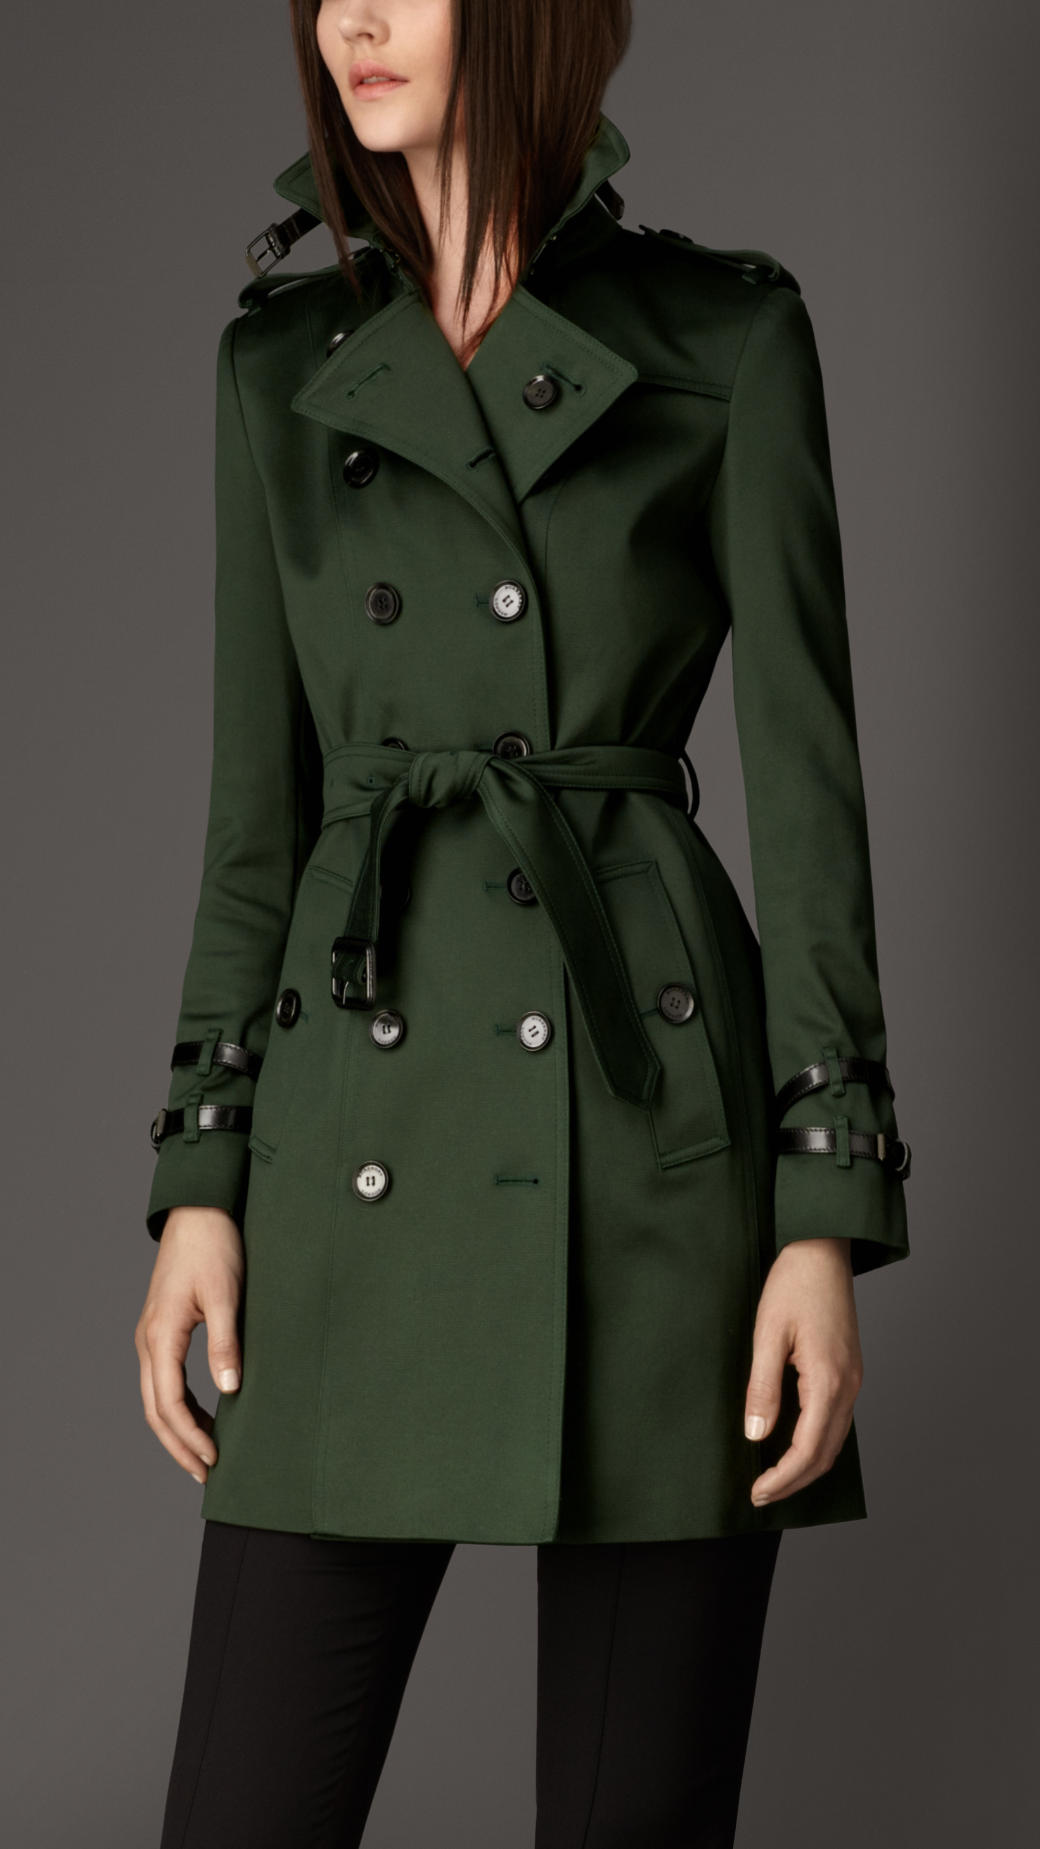 Mange farlige situationer Nautisk Conform Burberry Mid-length Leather Detail Trench Coat in Dark Racing Green (Green)  - Lyst